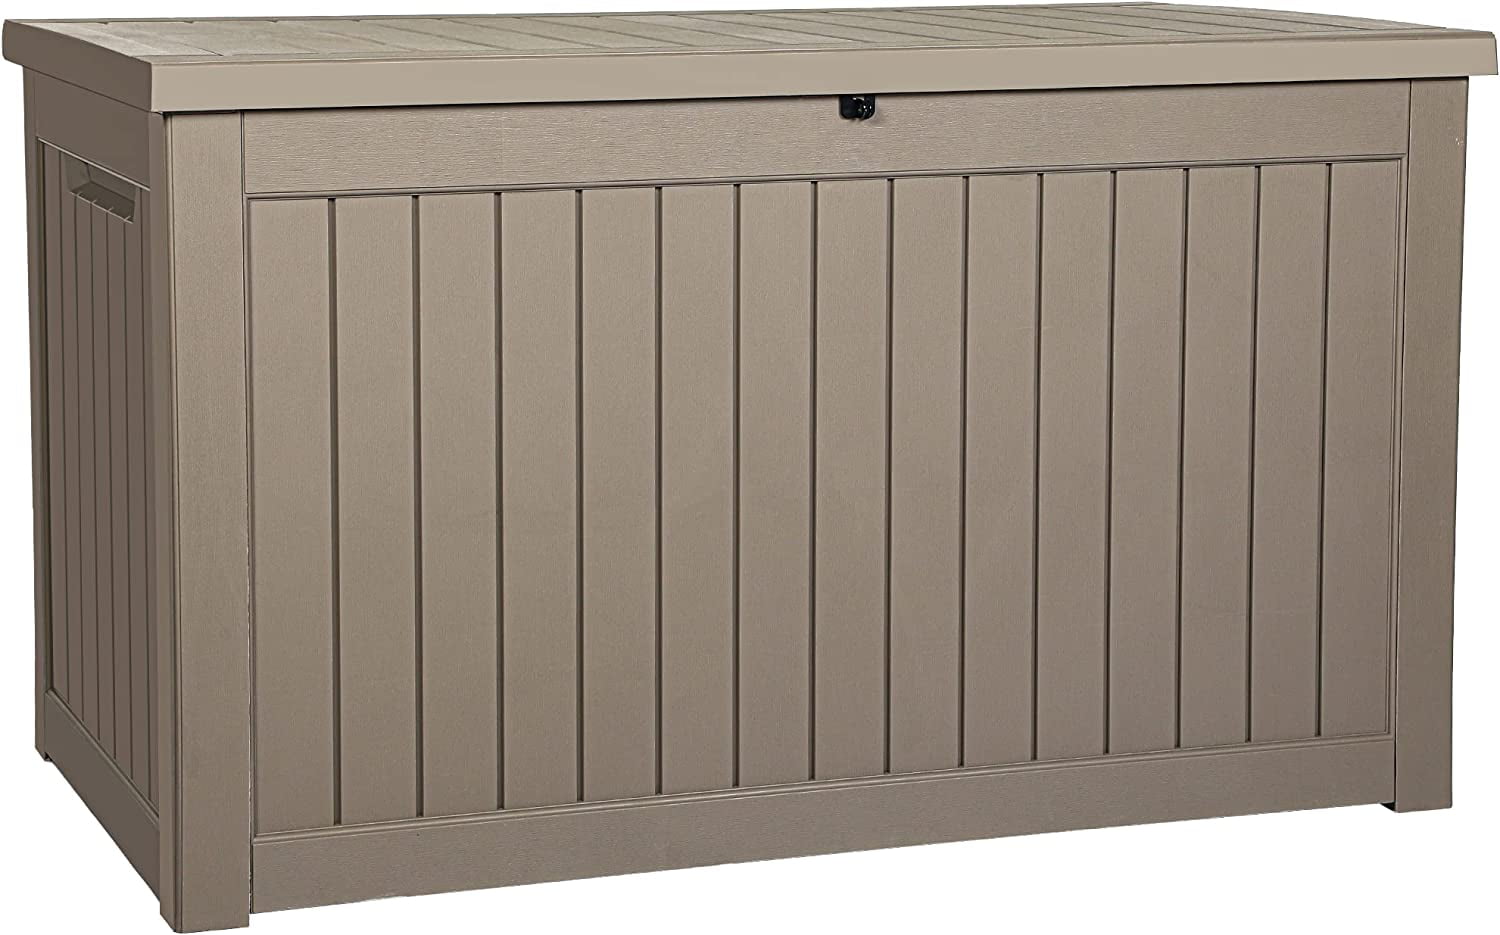 Dextrus Super-Sized 230 Gallon Outdoor Storage Deck Box for Patio  Furnishings, Outdoor Pillows, Yard Implements and Sports/Aquatic Gear,  Resistant to Weather, Lockable (Black) 